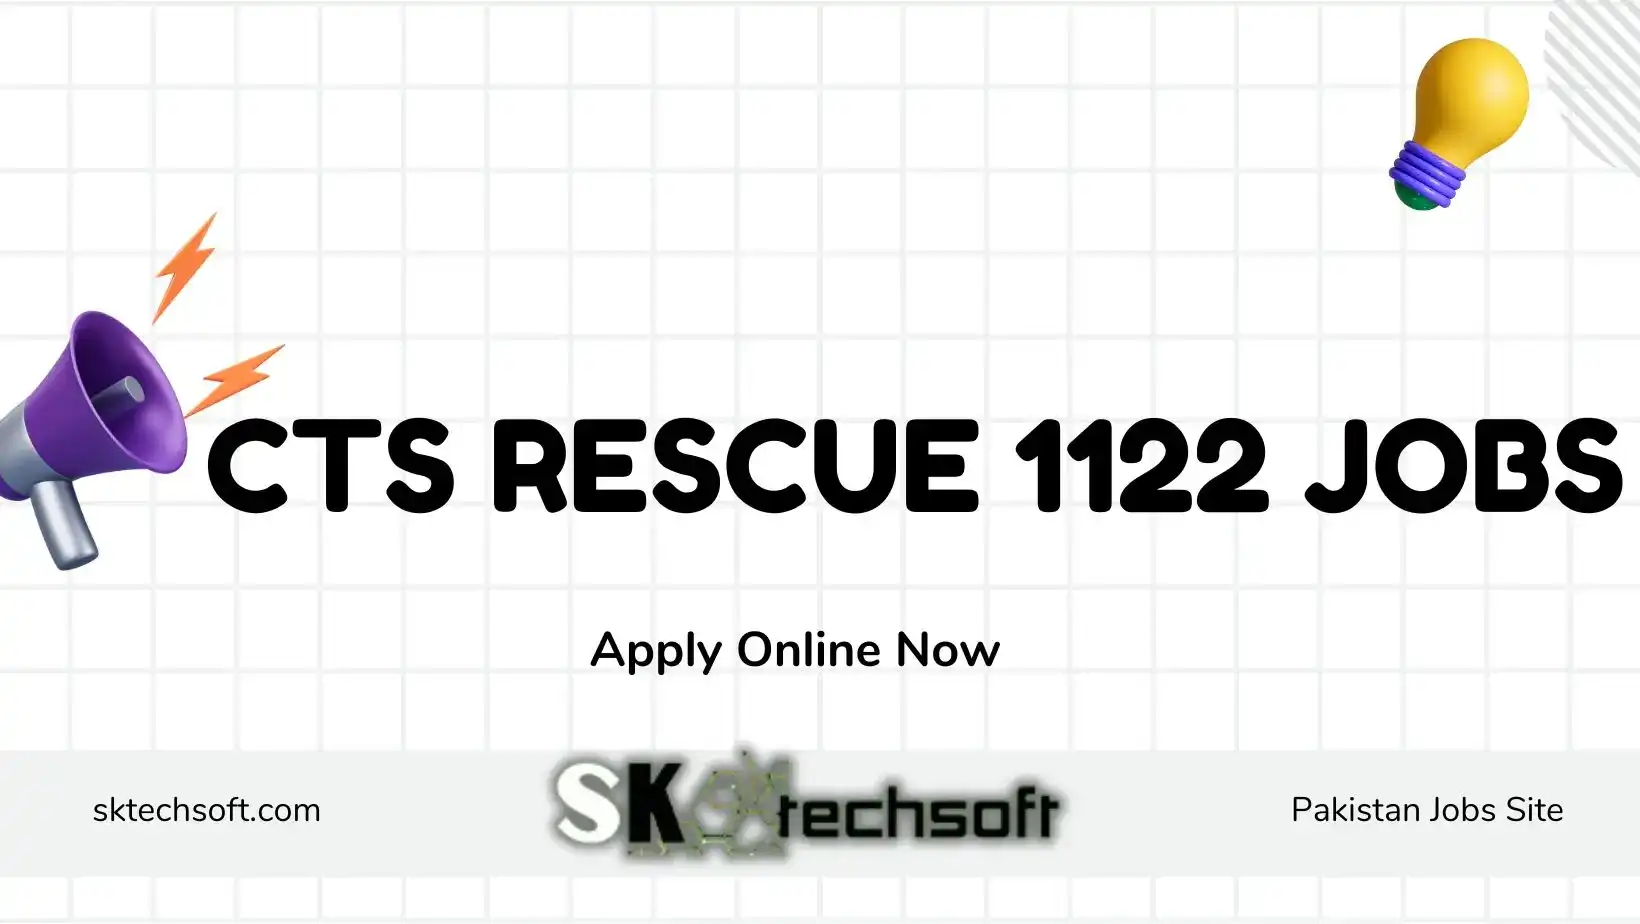 CTS RESCUE 1122 JOBS